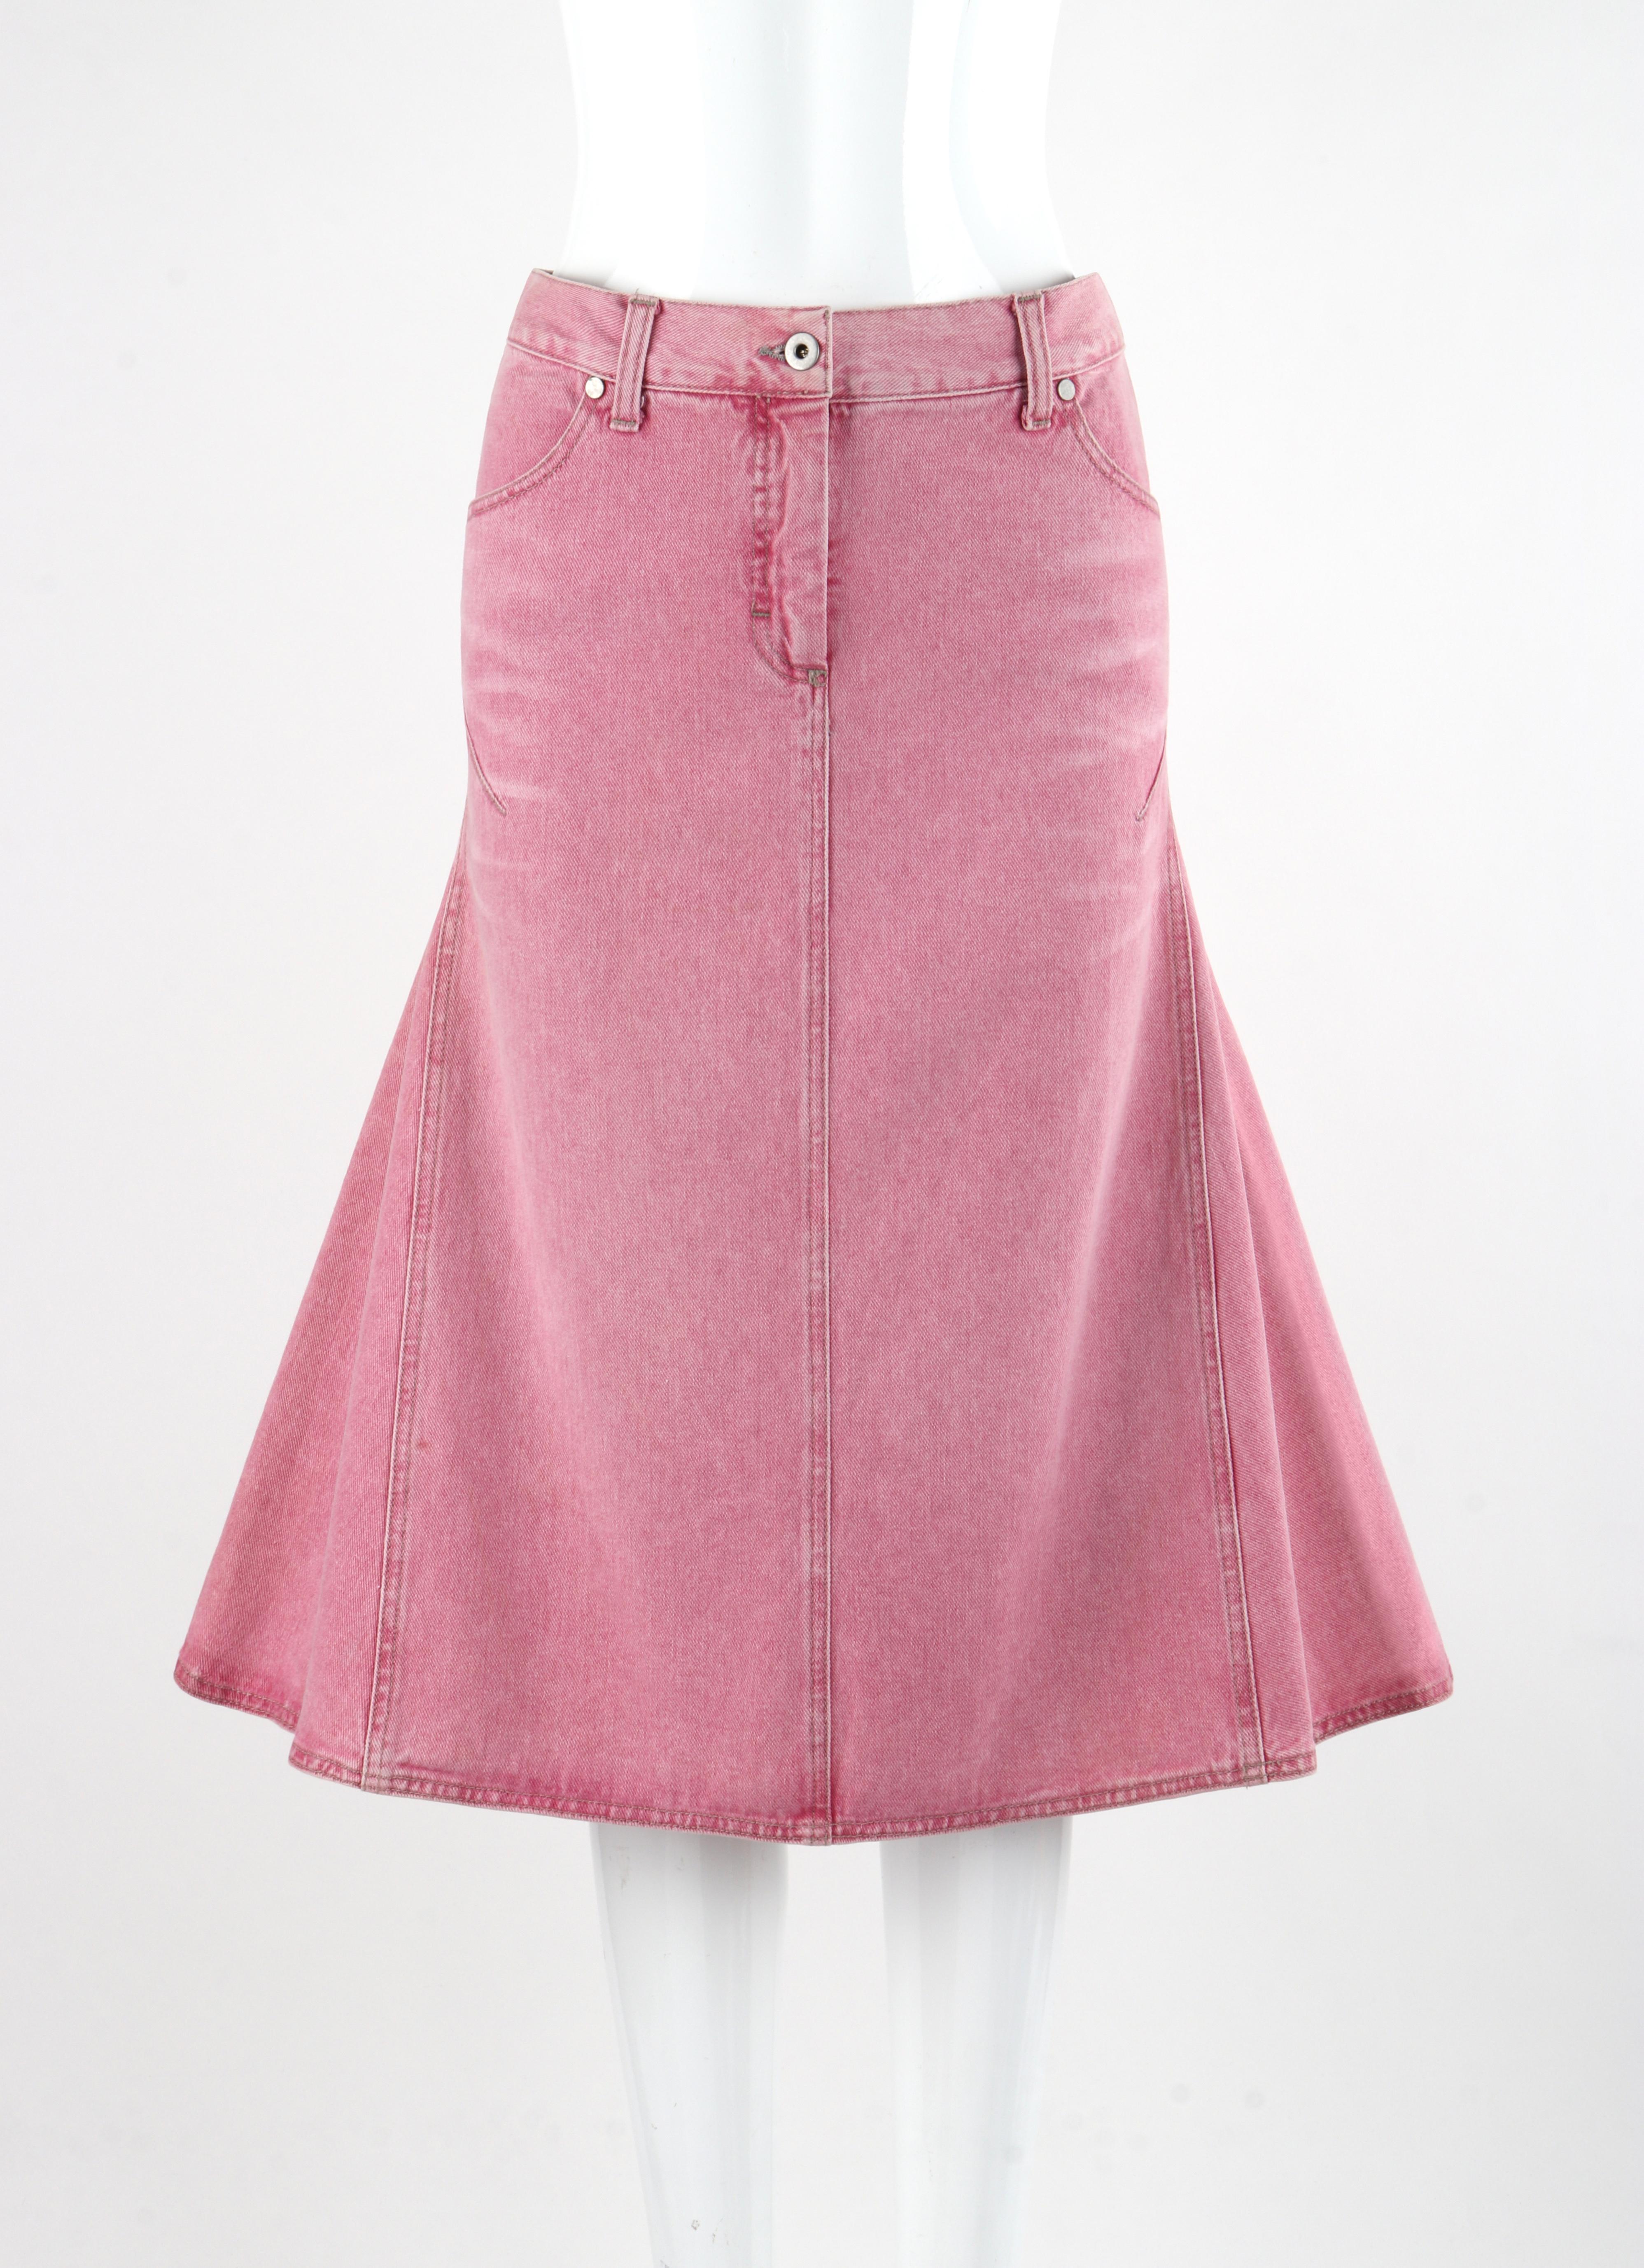 ALEXANDER McQUEEN c.1996 Pink Denim Structured Fit Midi Flared Pencil Skirt

Brand / Manufacturer: Alexander McQueen / Gibo Co Spa
Circa: 1996
Label(s): Alexander McQueen
Designer: Alexander McQueen
Style: Midi skirt
Color(s): Pink
Lined: No
Marked: